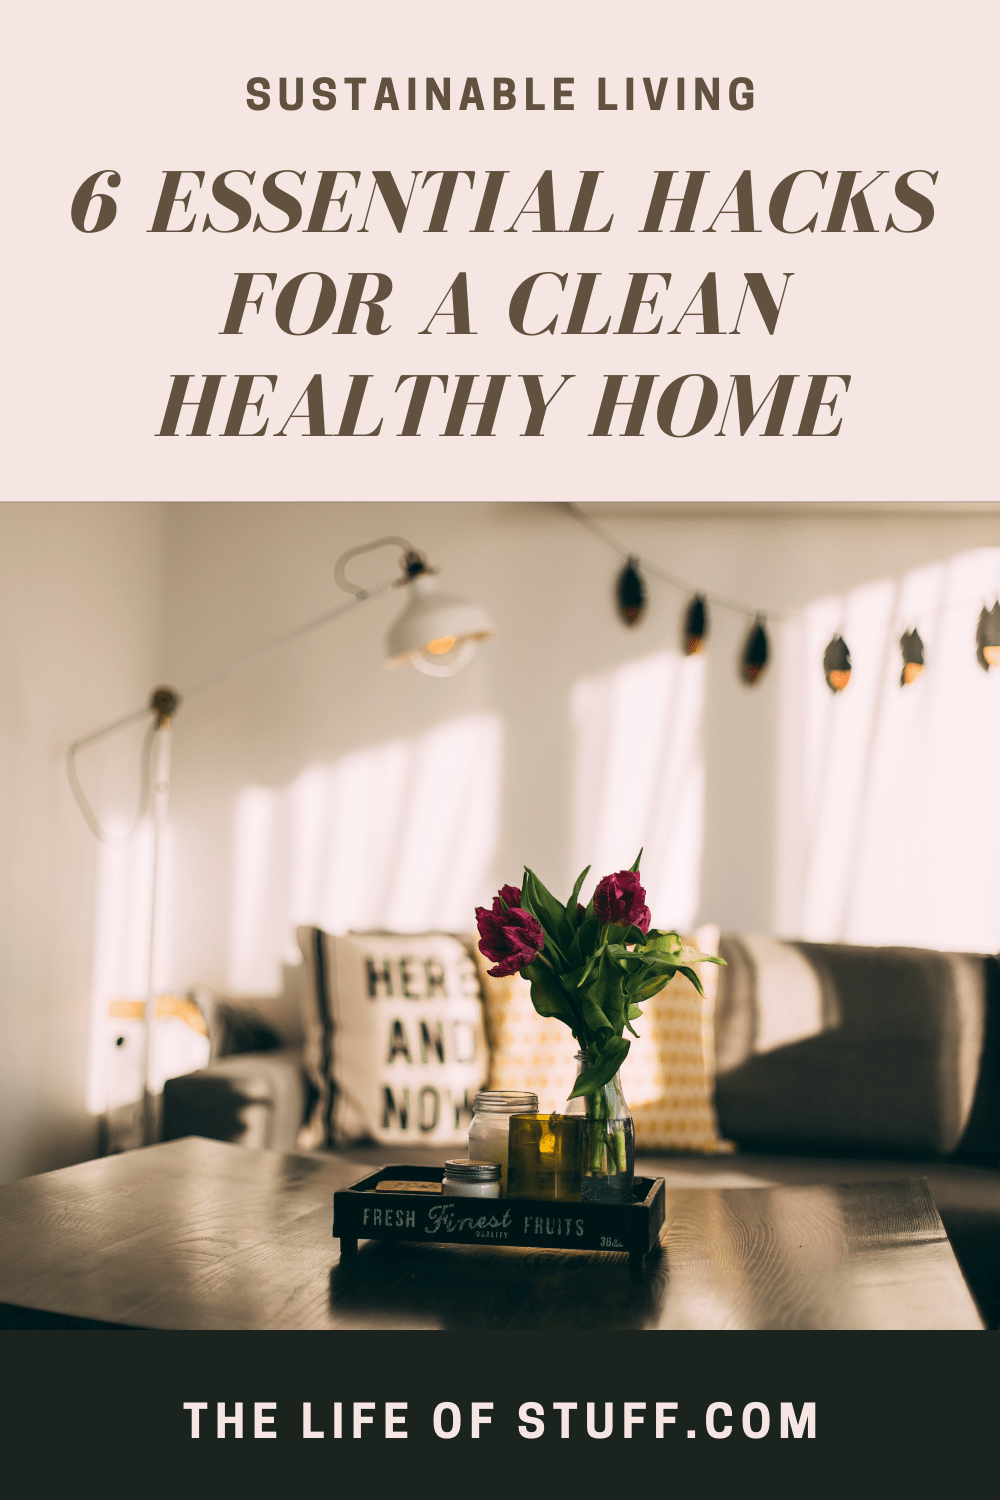 Sustainable Living - 6 Essential Hacks for a Clean Healthy Home - The Life of Stuff